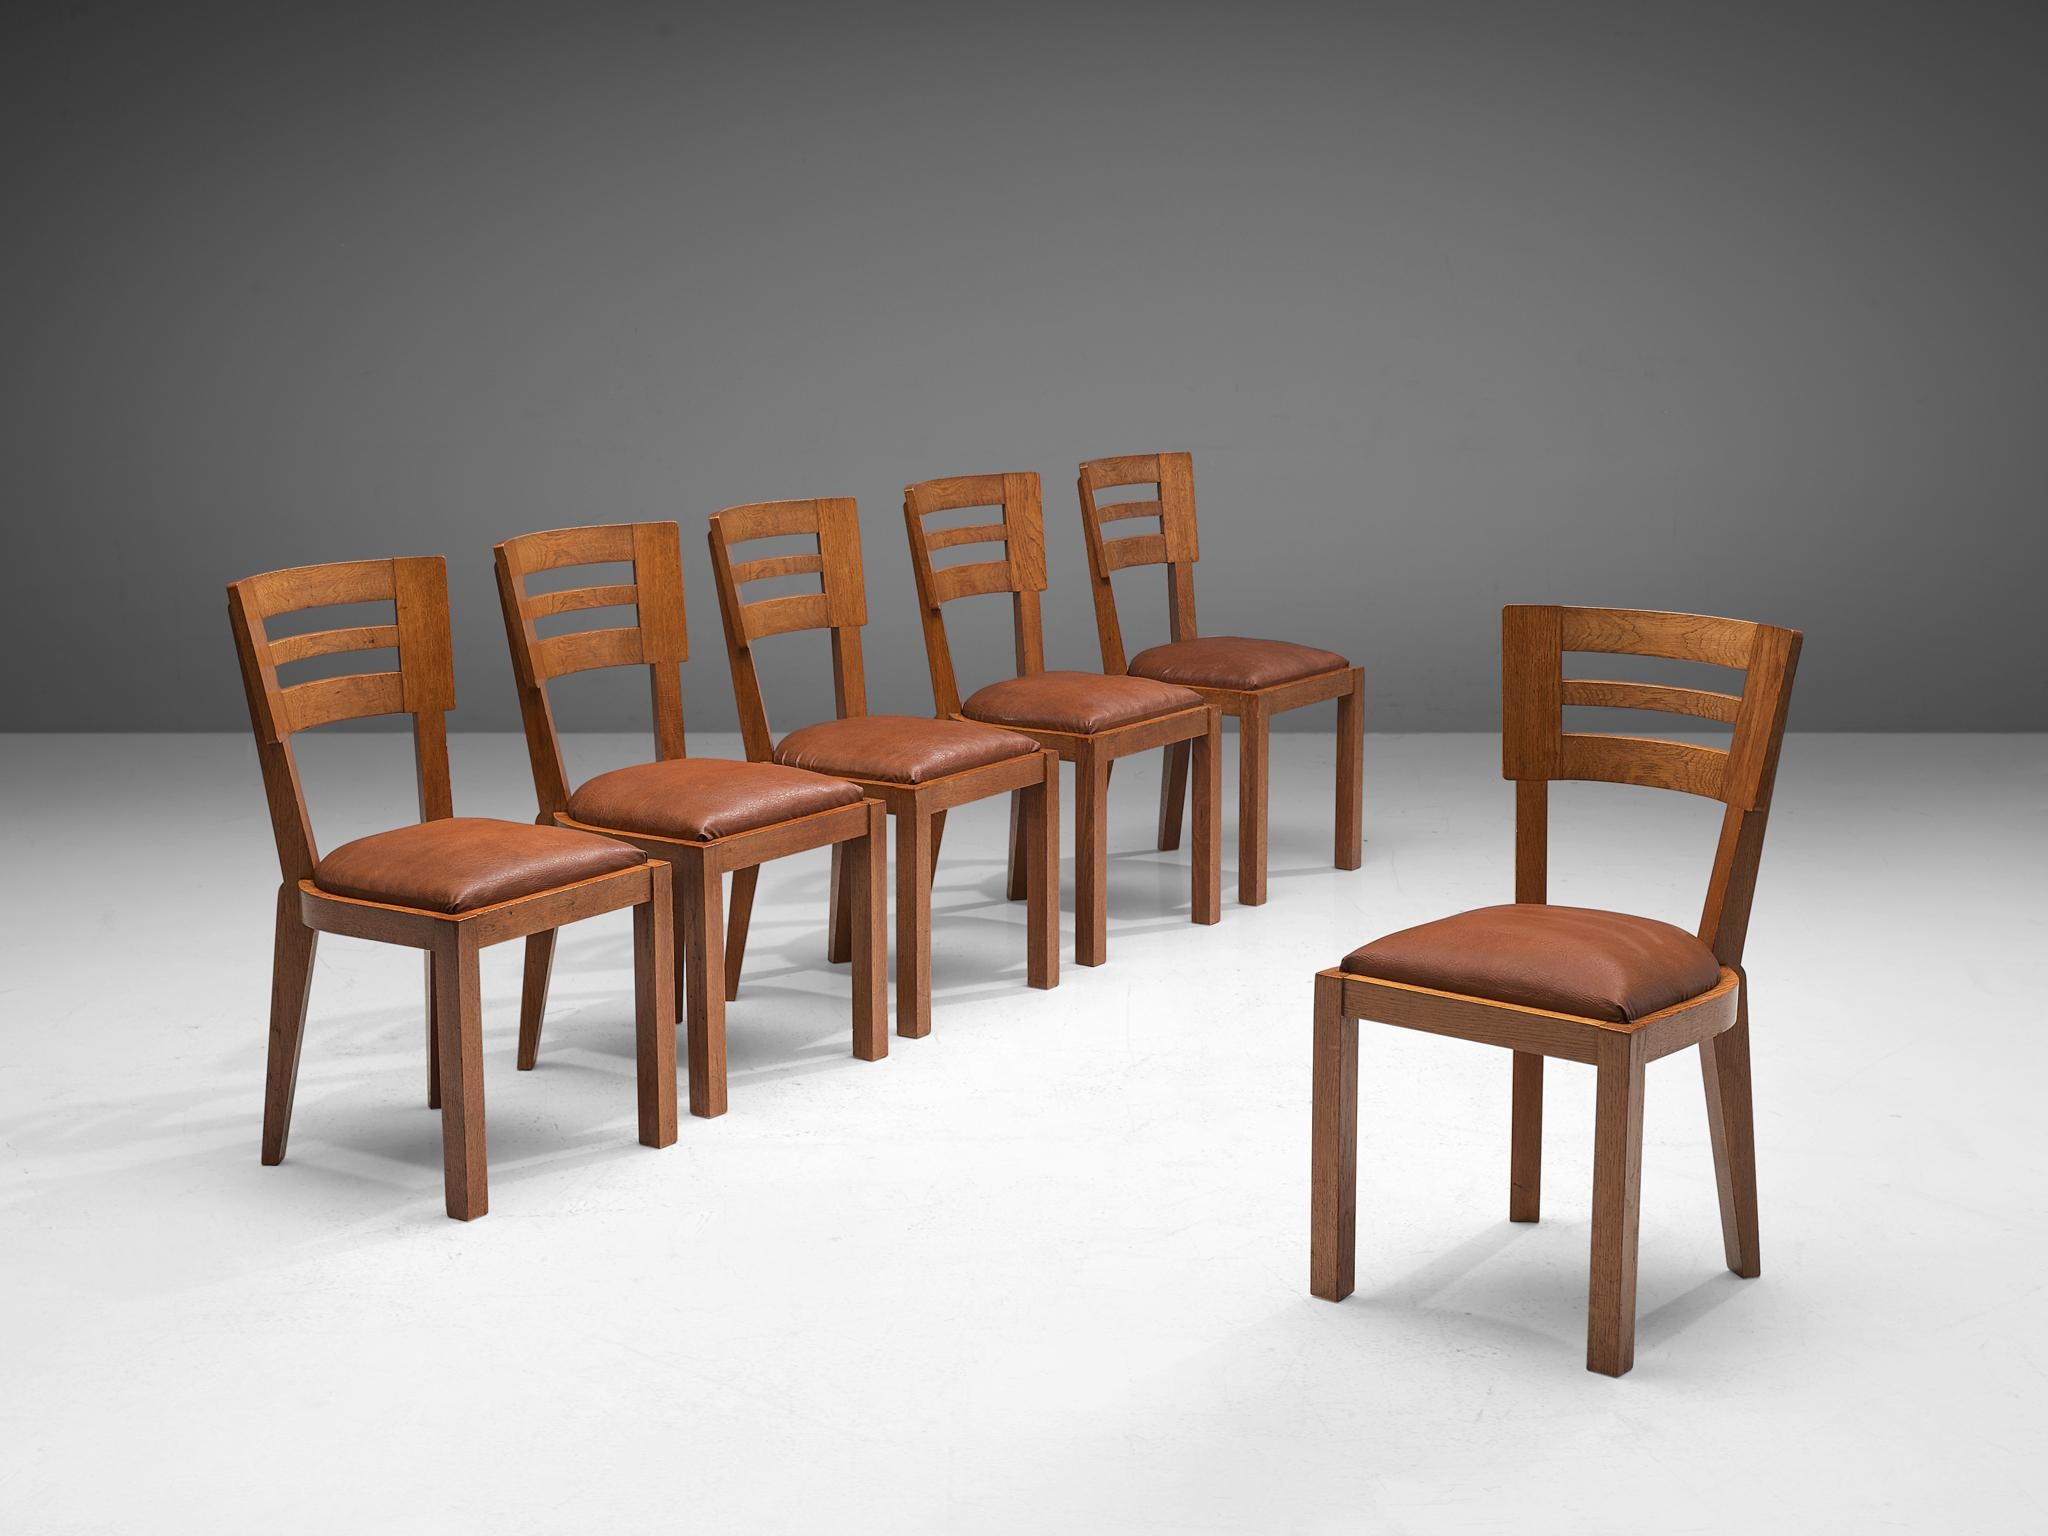 Set of six Art Deco dining chairs in solid oak, France, 1940s

This set of French dining chairs has a basic design, with strong proportions. The horizontal lines in the wooden back give the chair an open character. A nice visual aspect of the chair